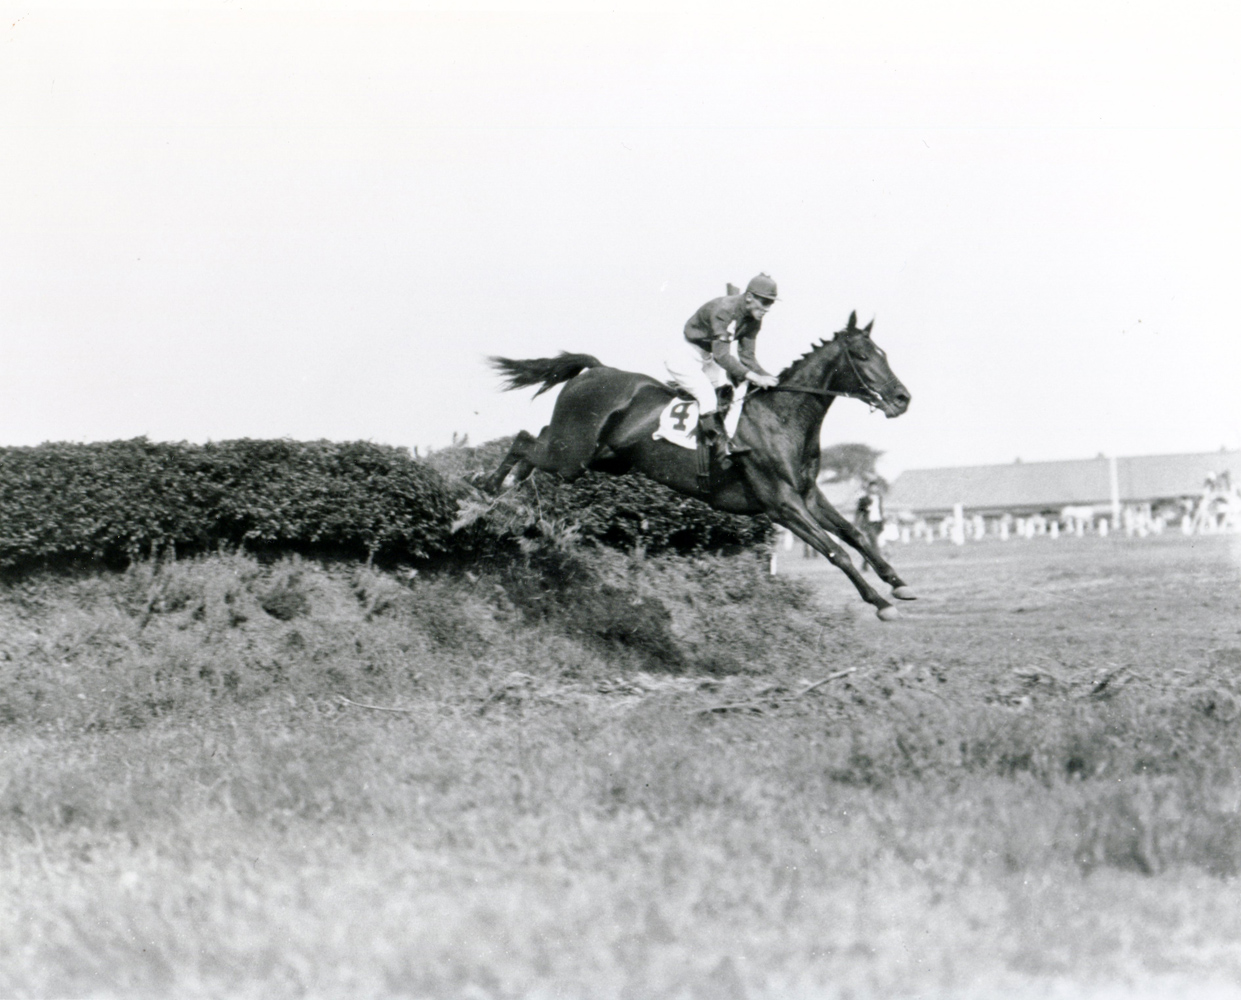 George Bostwick and Escapade clearing a jump in a steeplechase event at Aqueduct, September 1932 (Keeneland Library Cook Collection/Museum Collection)